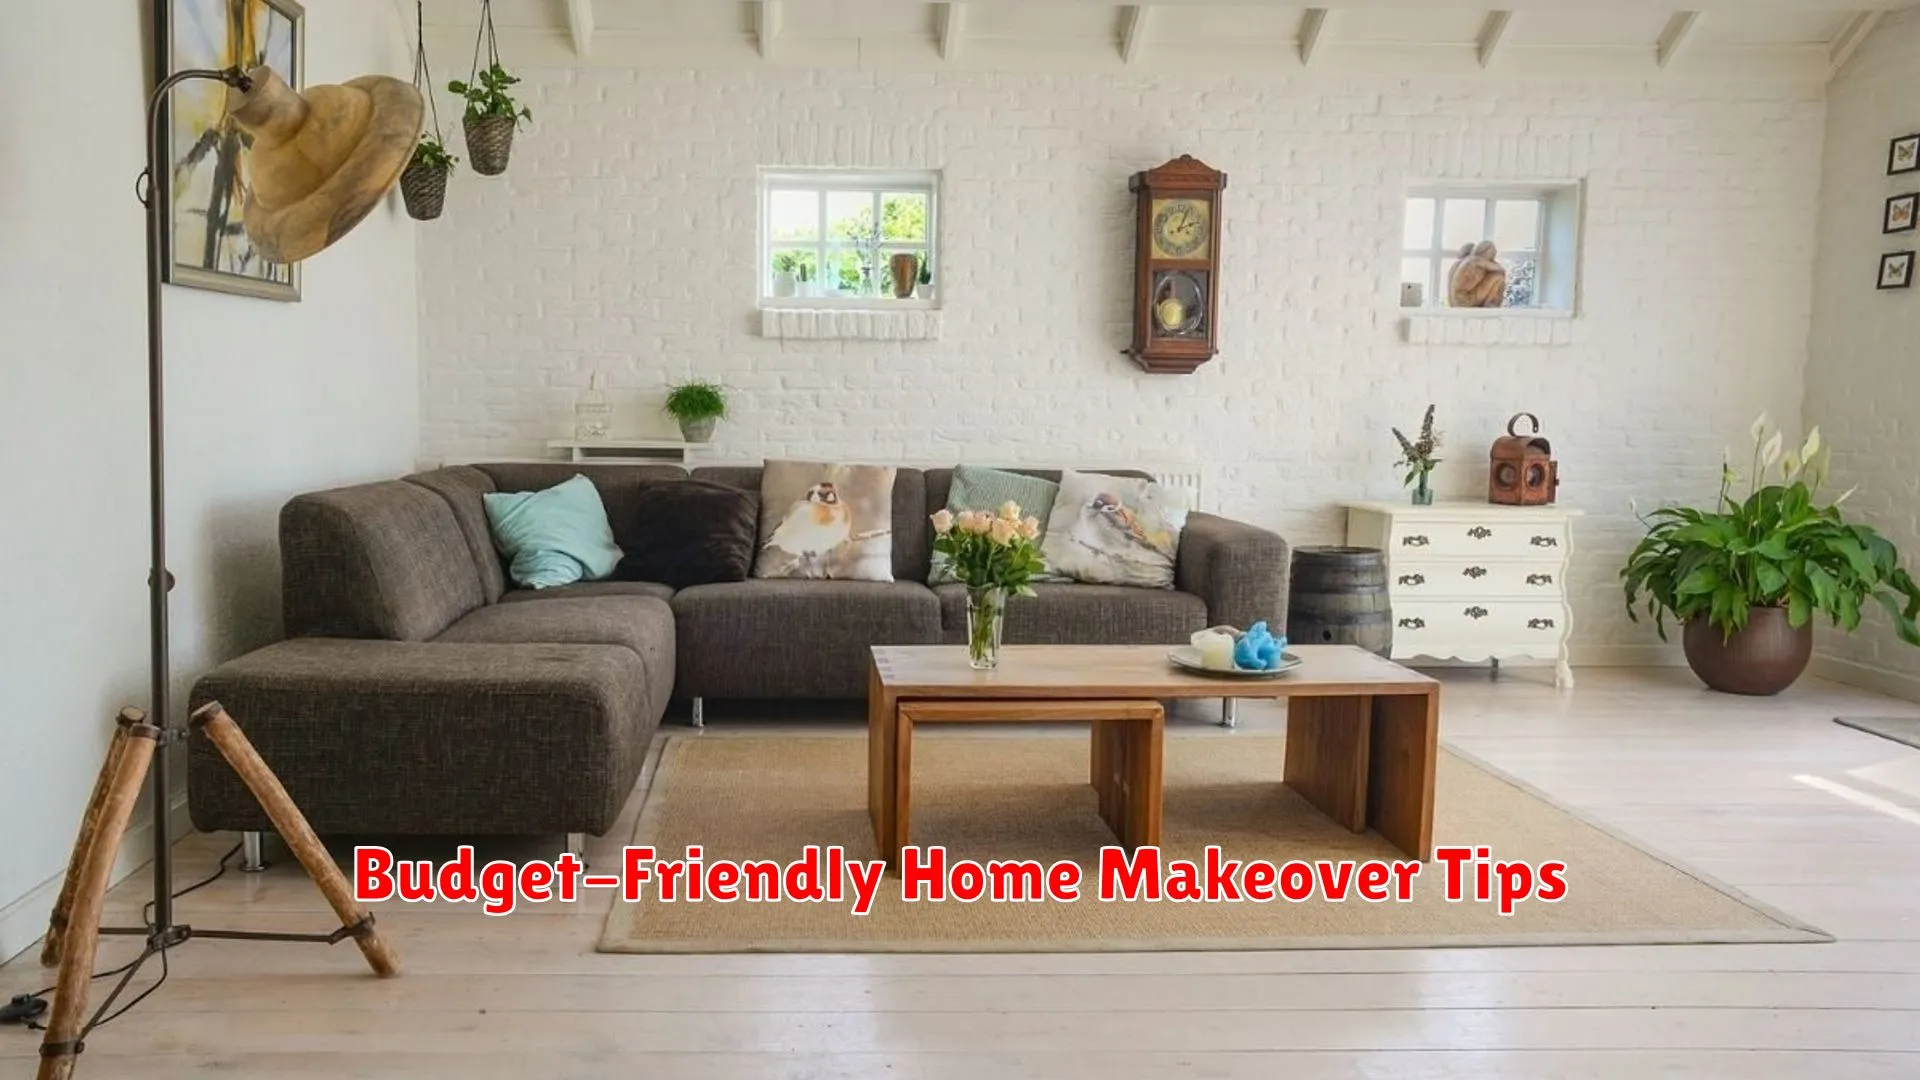 Budget-Friendly Home Makeover Tips